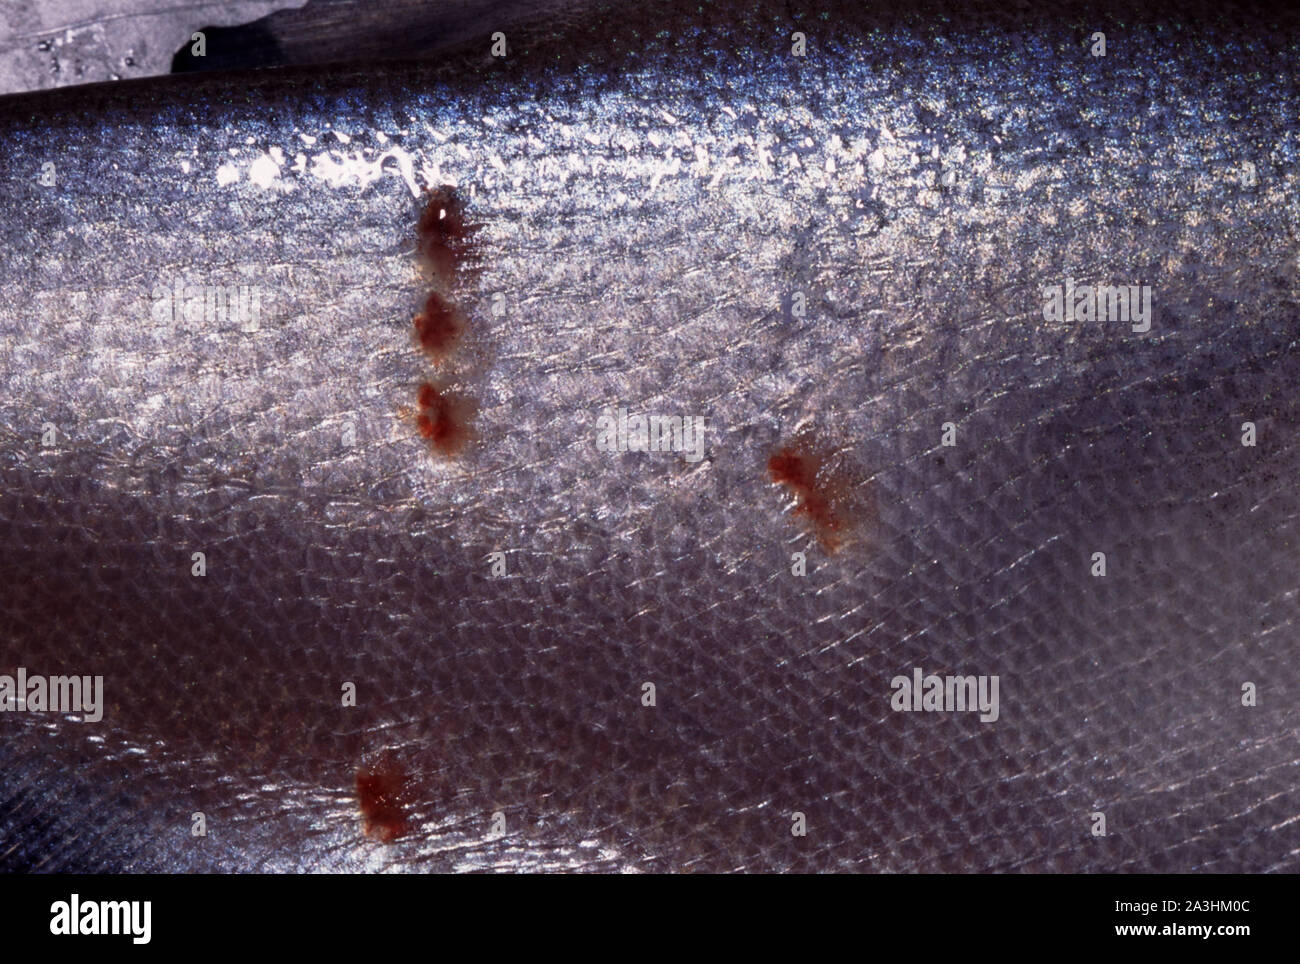 Aquarium fish disease: injuries by argulosis (Argulus sp.) in Moonlight gourami (Trichogaster microlepis) Stock Photo